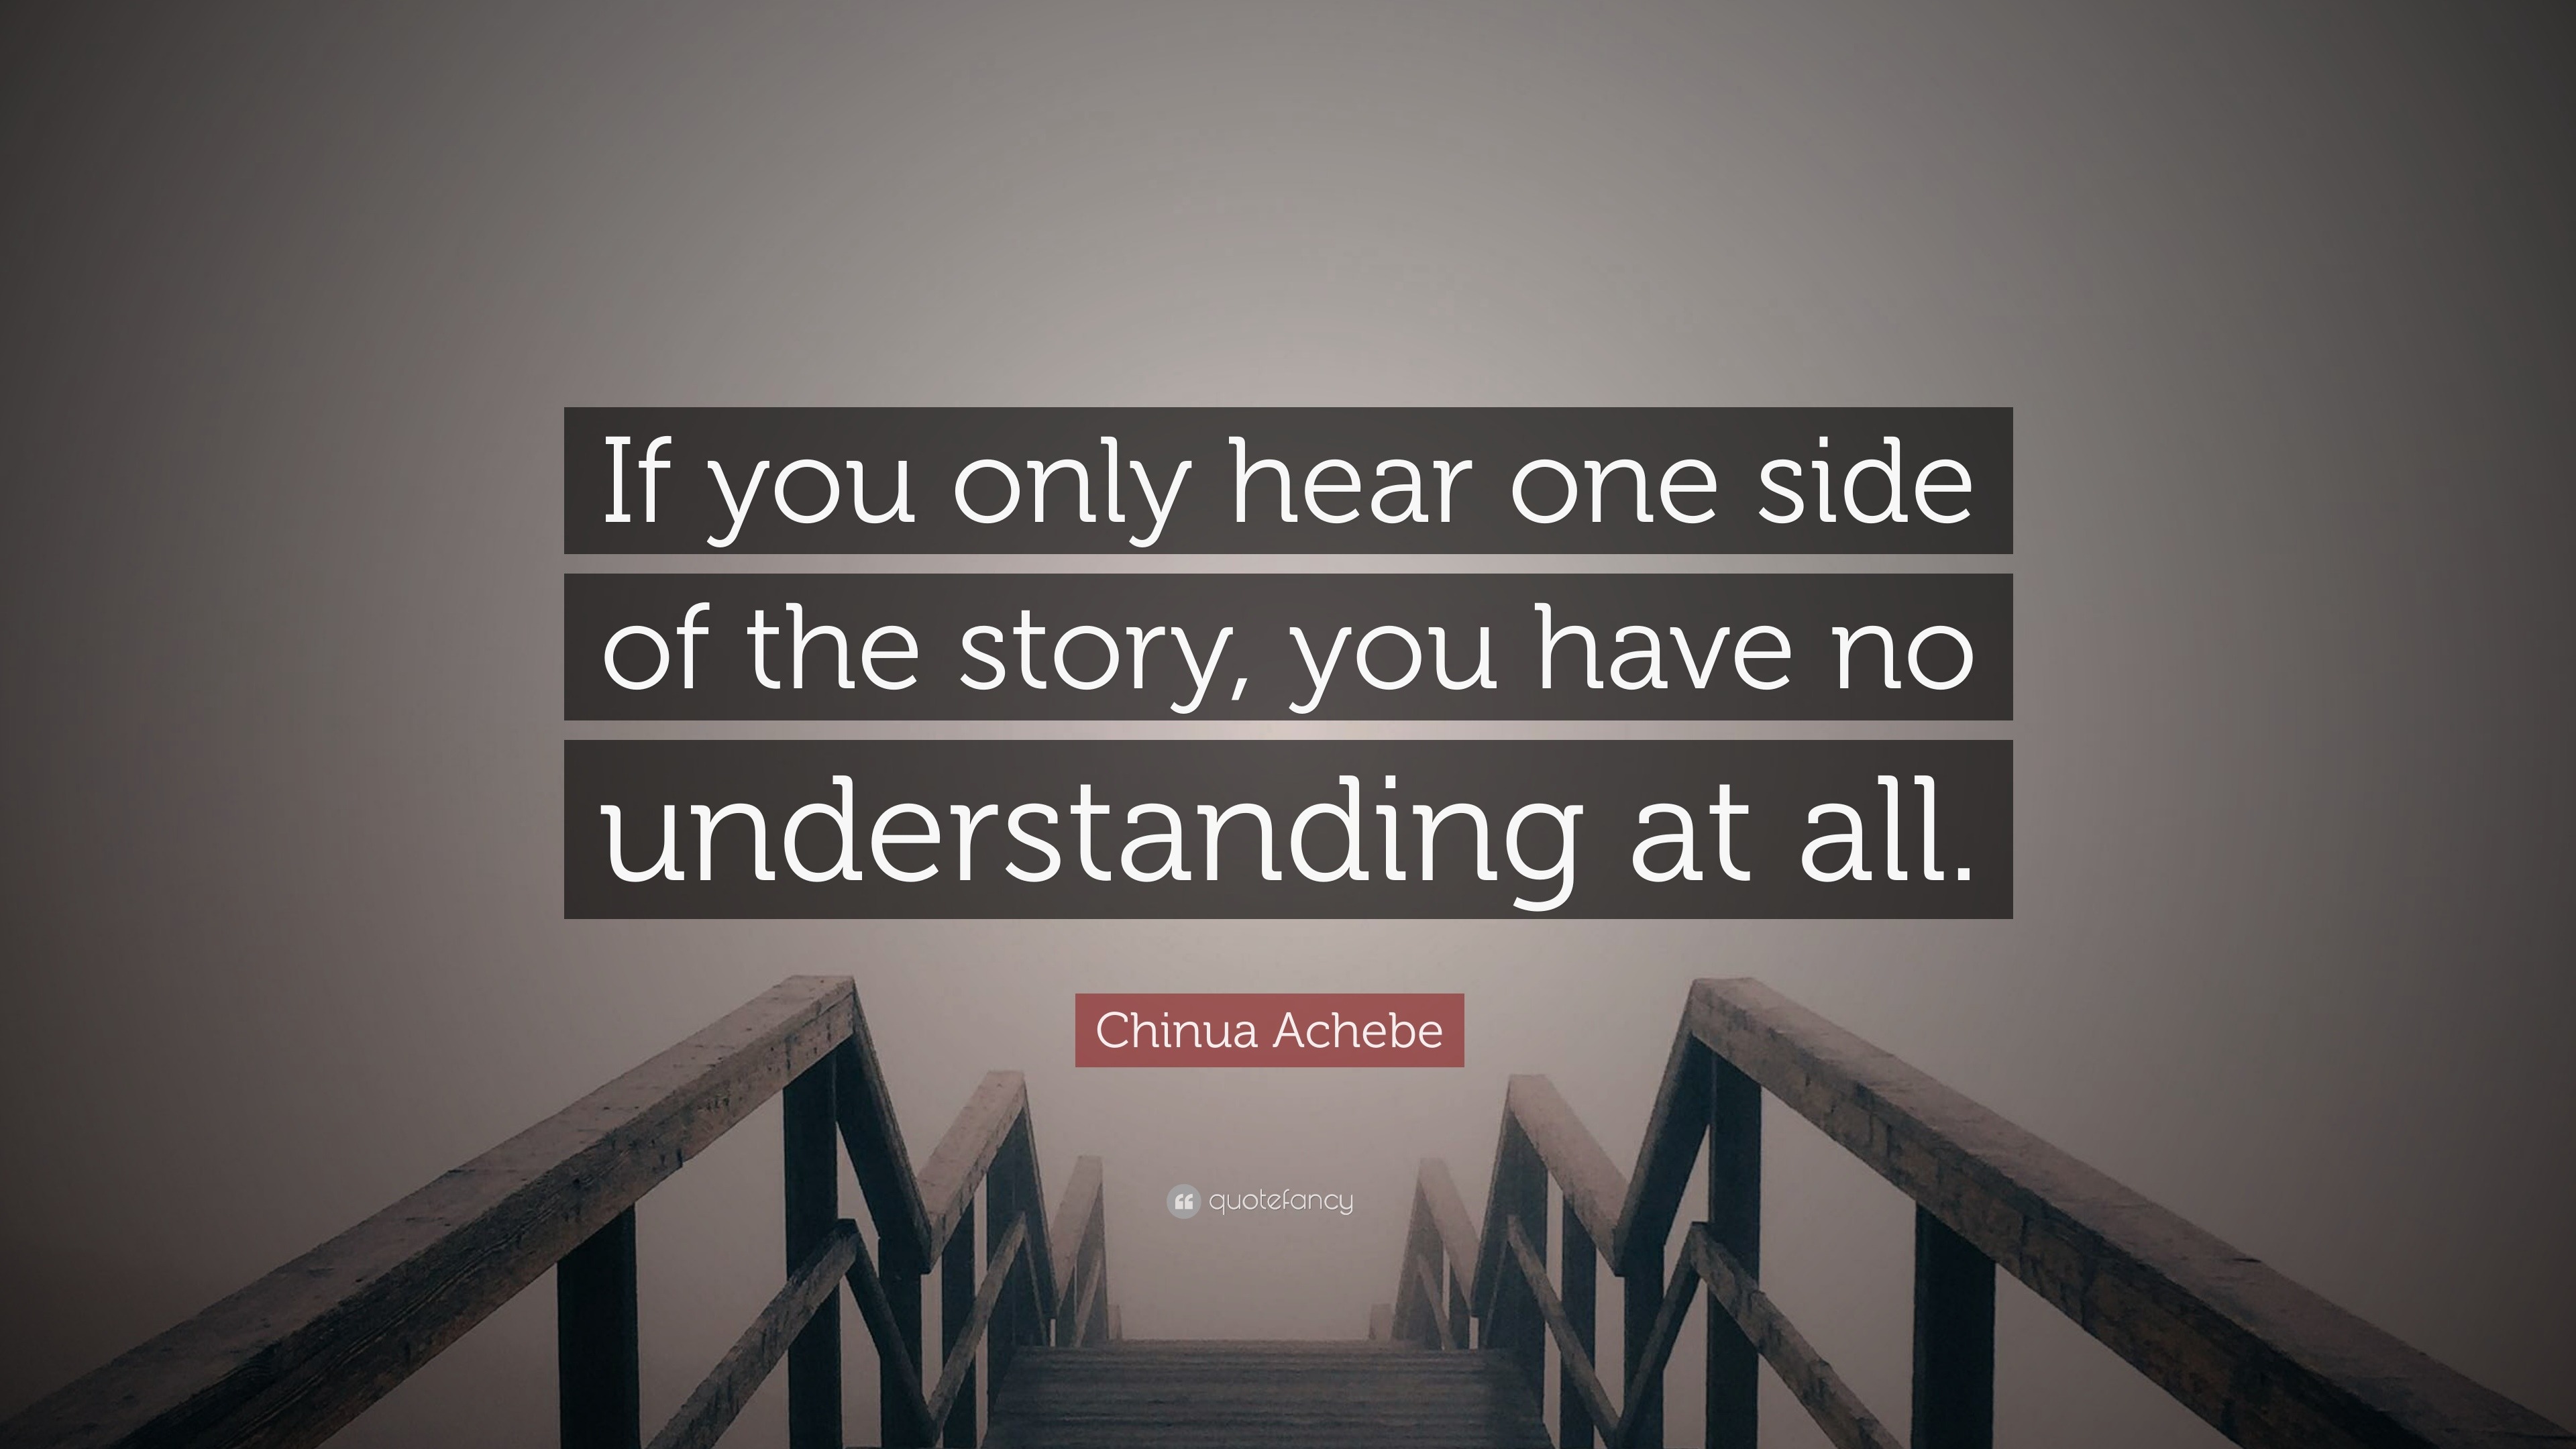 https://quotefancy.com/media/wallpaper/3840x2160/1732459-Chinua-Achebe-Quote-If-you-only-hear-one-side-of-the-story-you.jpg